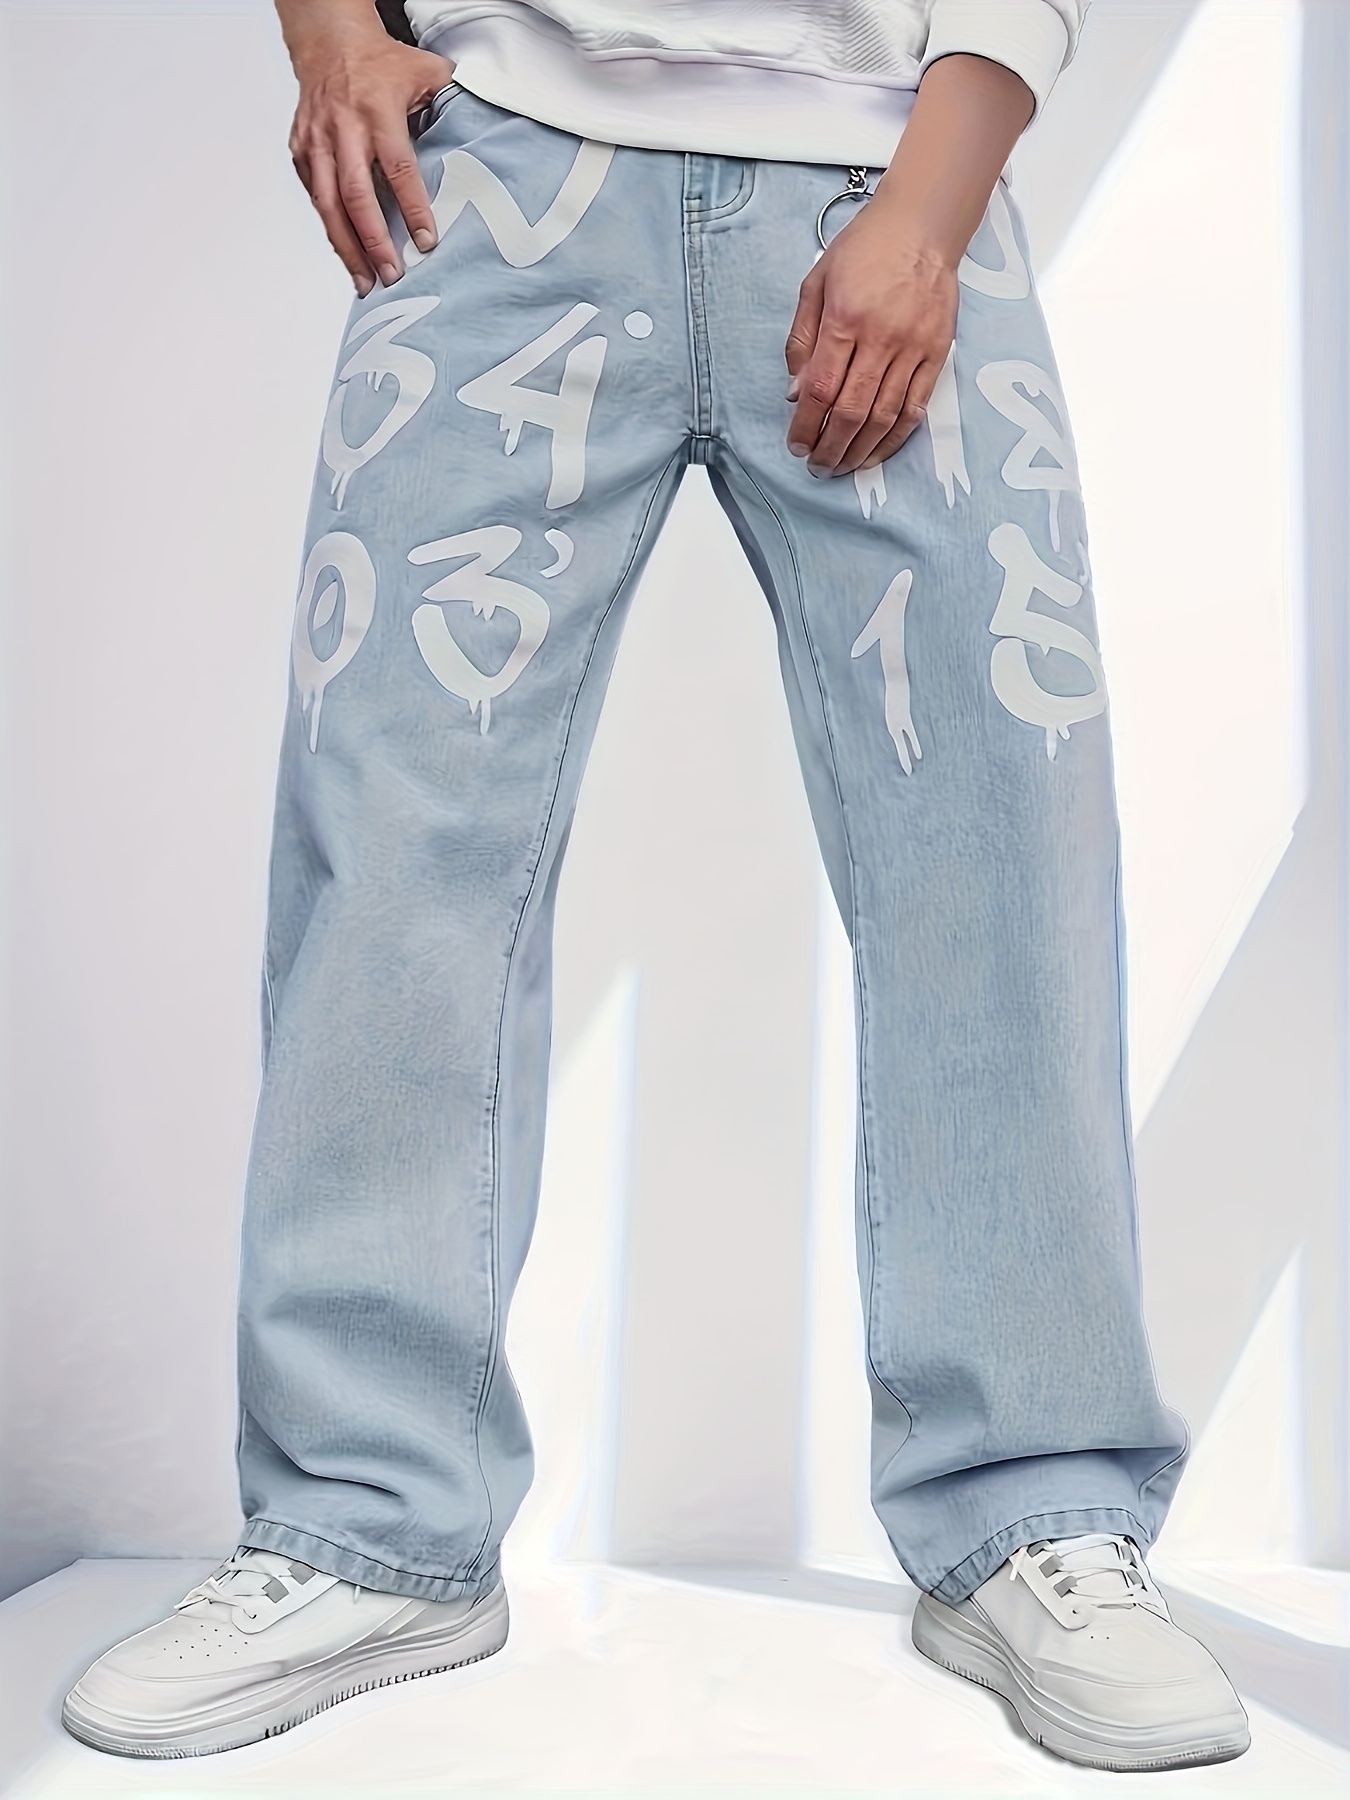 Letter Print Baggy Jeans, Men's Casual Street Style Loose Fit Jeans